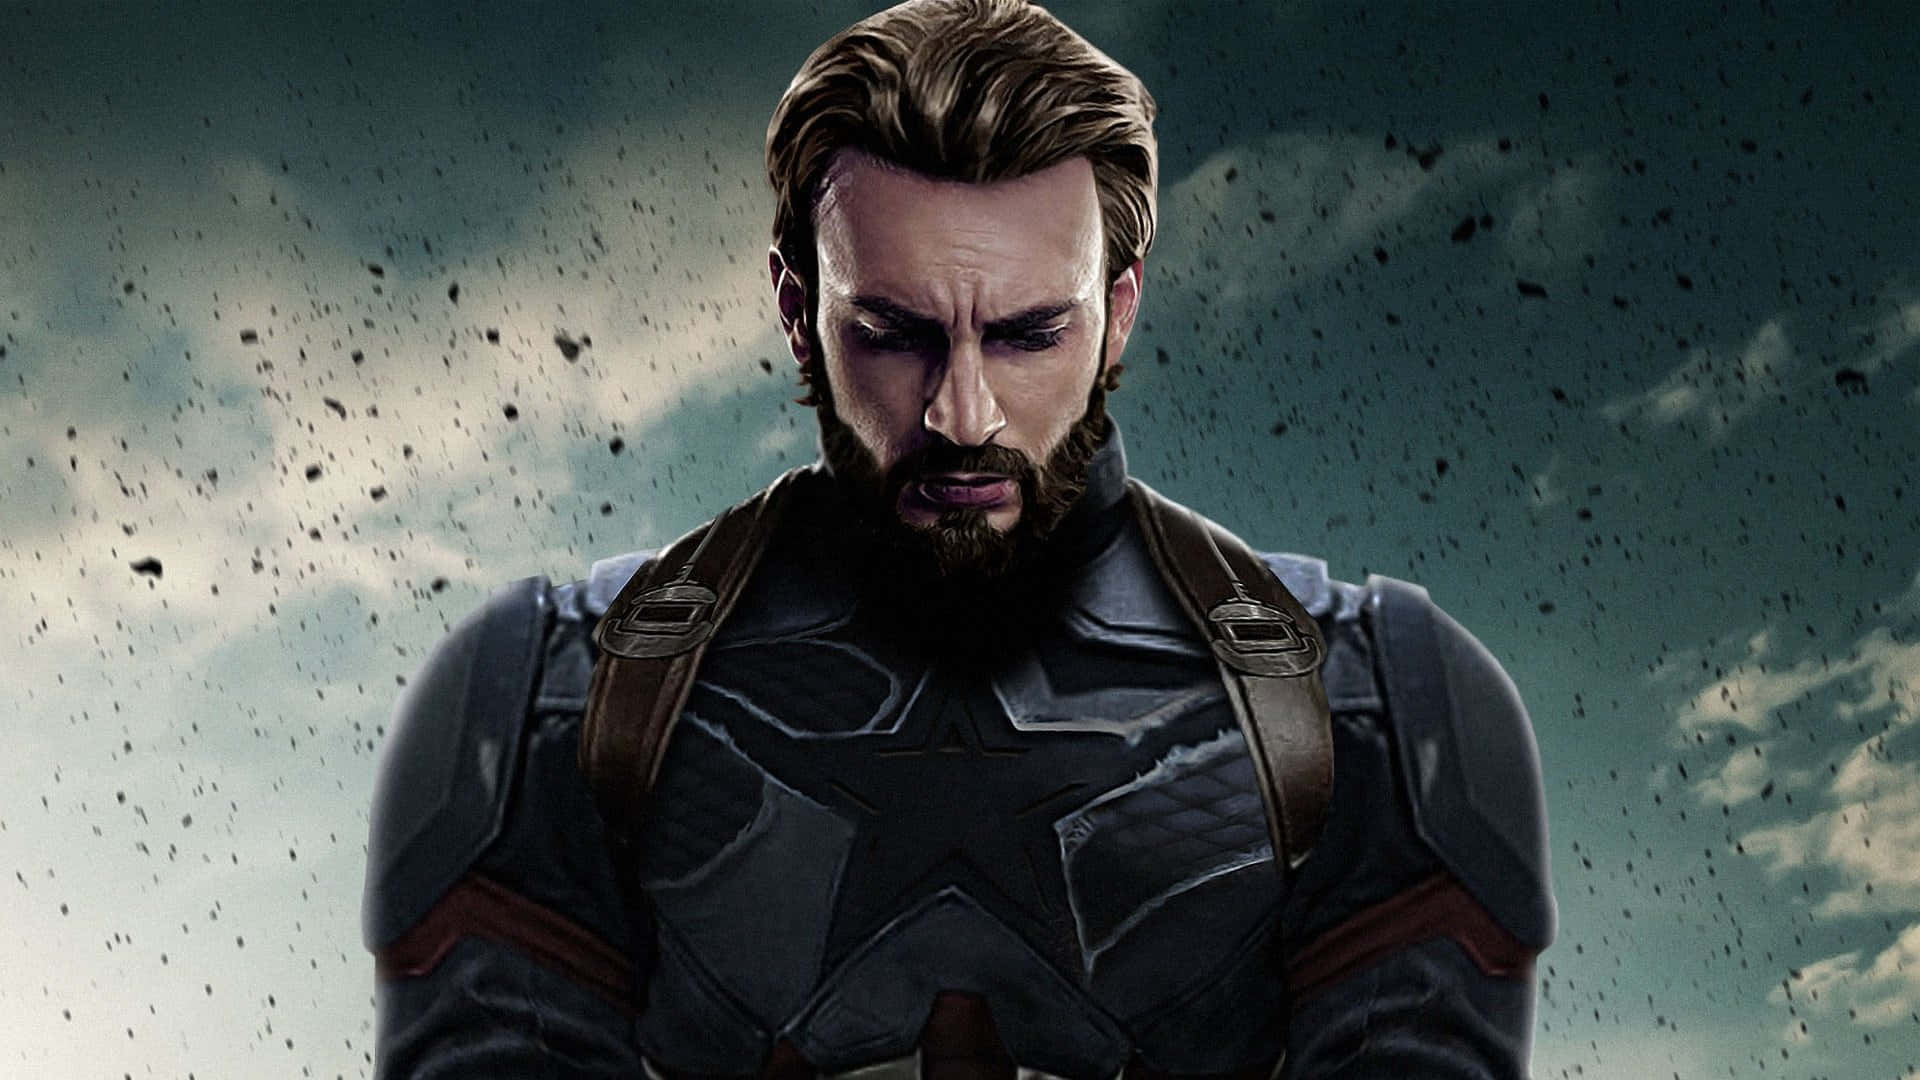 Captain America: A Hero Ready To Fight